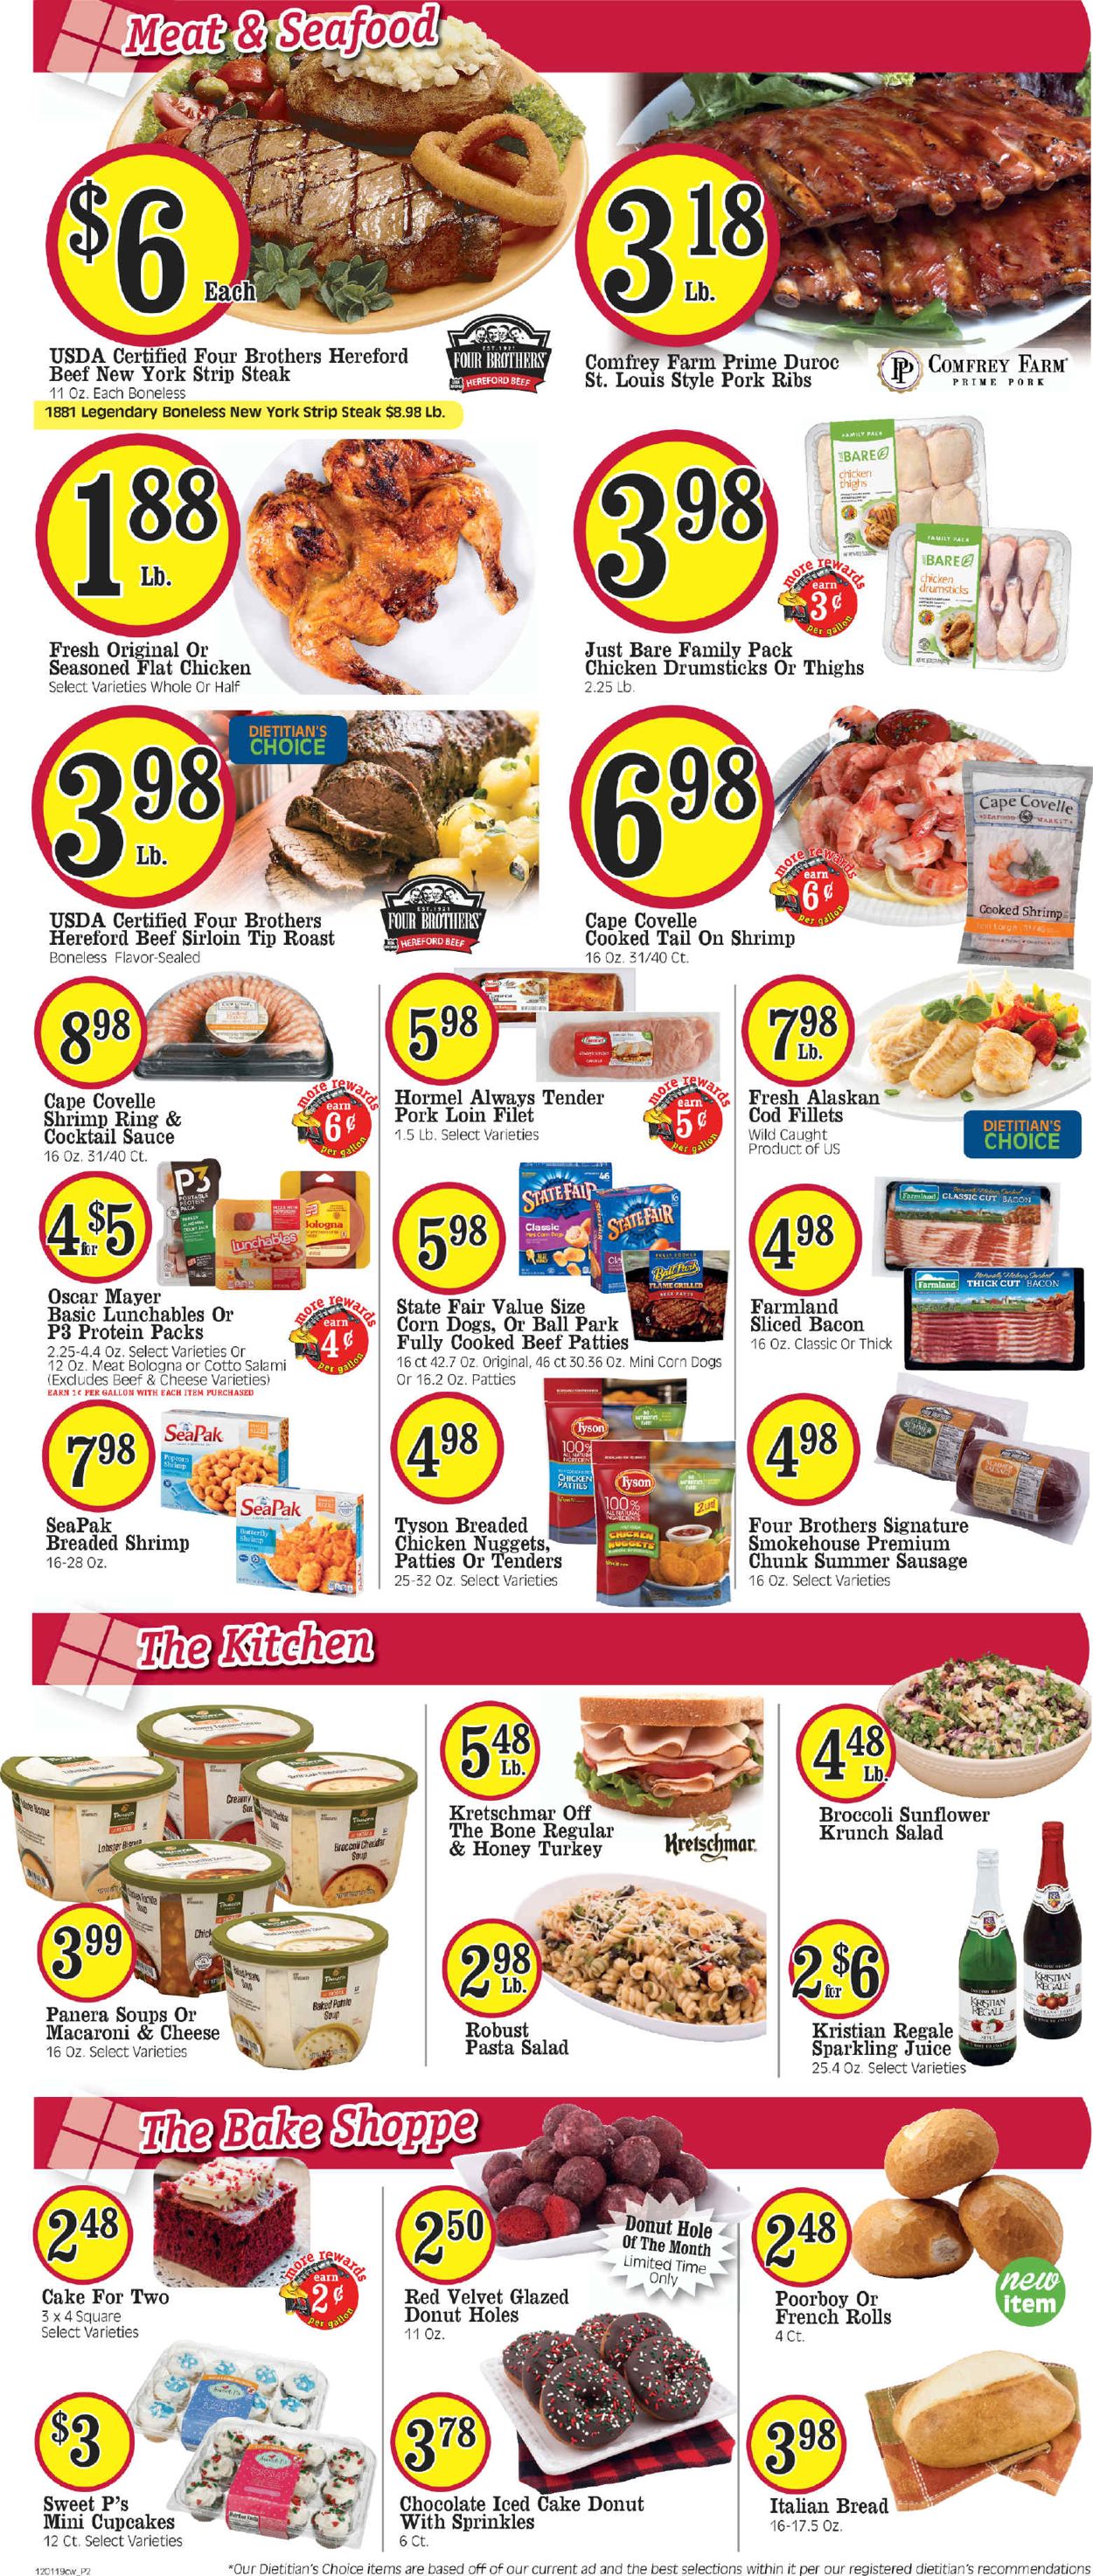 Cash Wise Weekly Ad Circular - valid 12/01-12/07/2019 (Page 2)